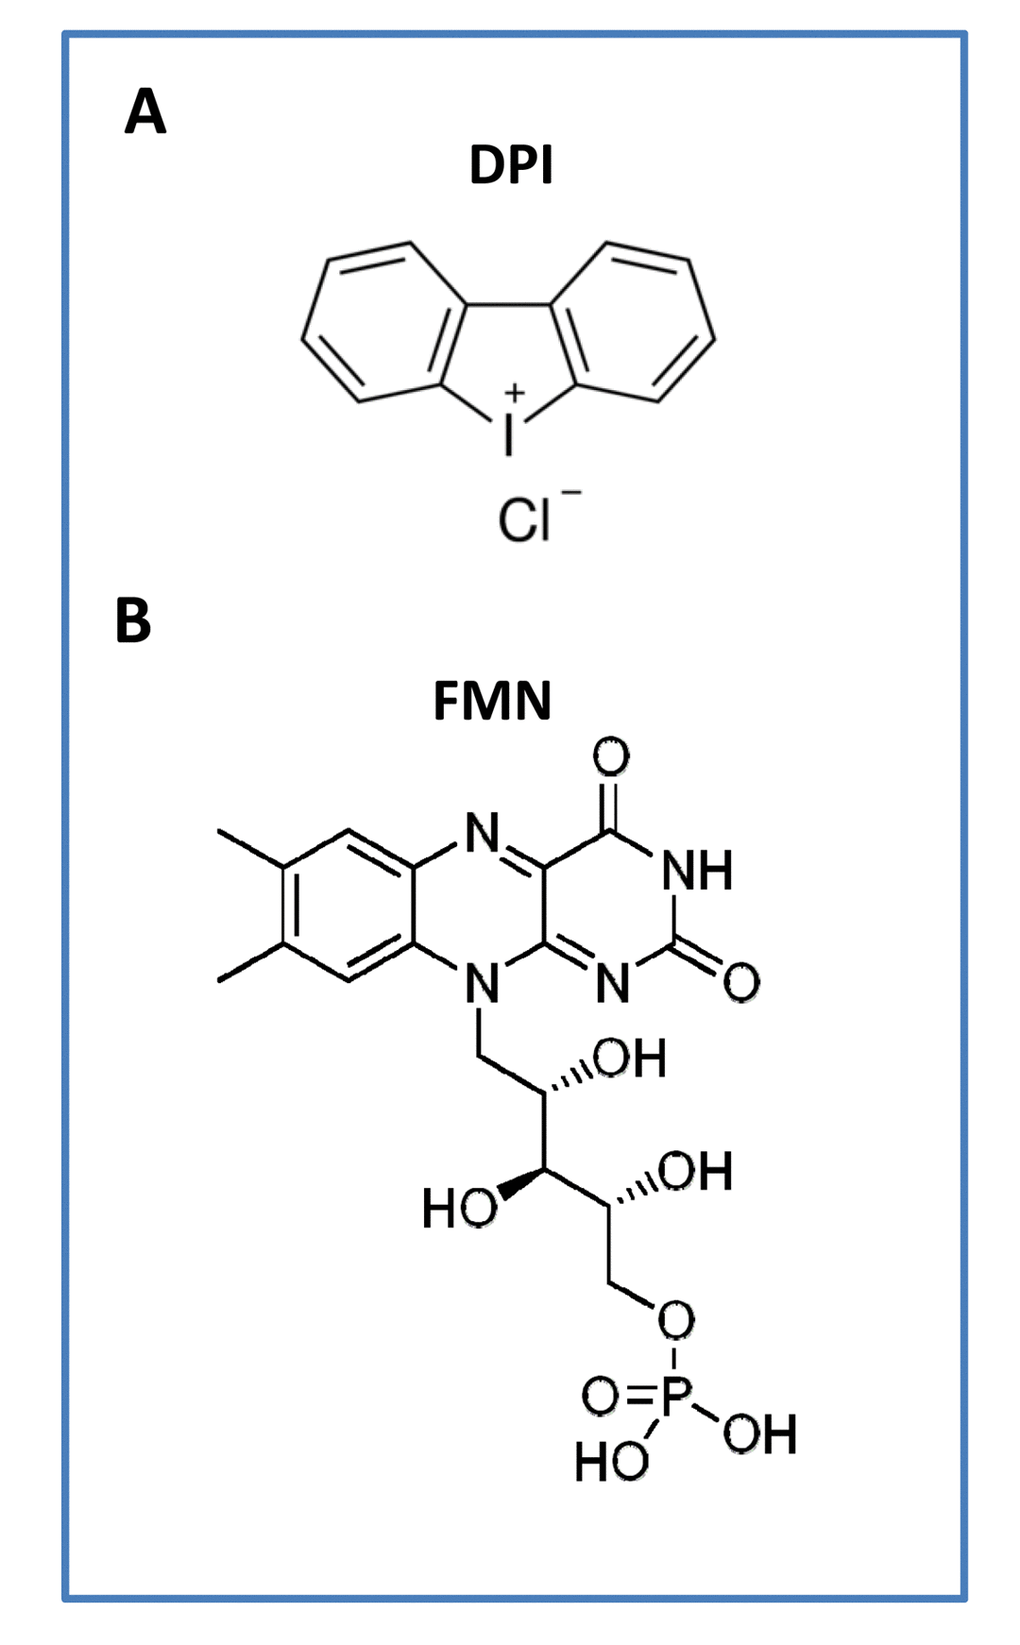 The chemical structures of (A) DPI and (B) FMN are compared. It has been proposed that the effects of DPI are mediated through the general inhibition of flavo-enzymes, such as mitochondrial Complex I (NADH dehydrogenase), via the targeting of FMN. The three known flavin-containing protein components of Complex I are: NDUFV1 (51 kD), NDUFV2 (24 kD) and NDUFV3 (10 kD). It has been suggested that DPI chemically reacts with FMN, interrupting its function and impairing electron transport. In the human genome, there are ~90 flavo-proteins; more than two-thirds require FAD, while only ~15% require FMN. Flavo-proteins are very often localized to the mitochondria, because of their role in redox reactions. Nearly all flavo-proteins (~90%) catalyze some form of redox reaction.